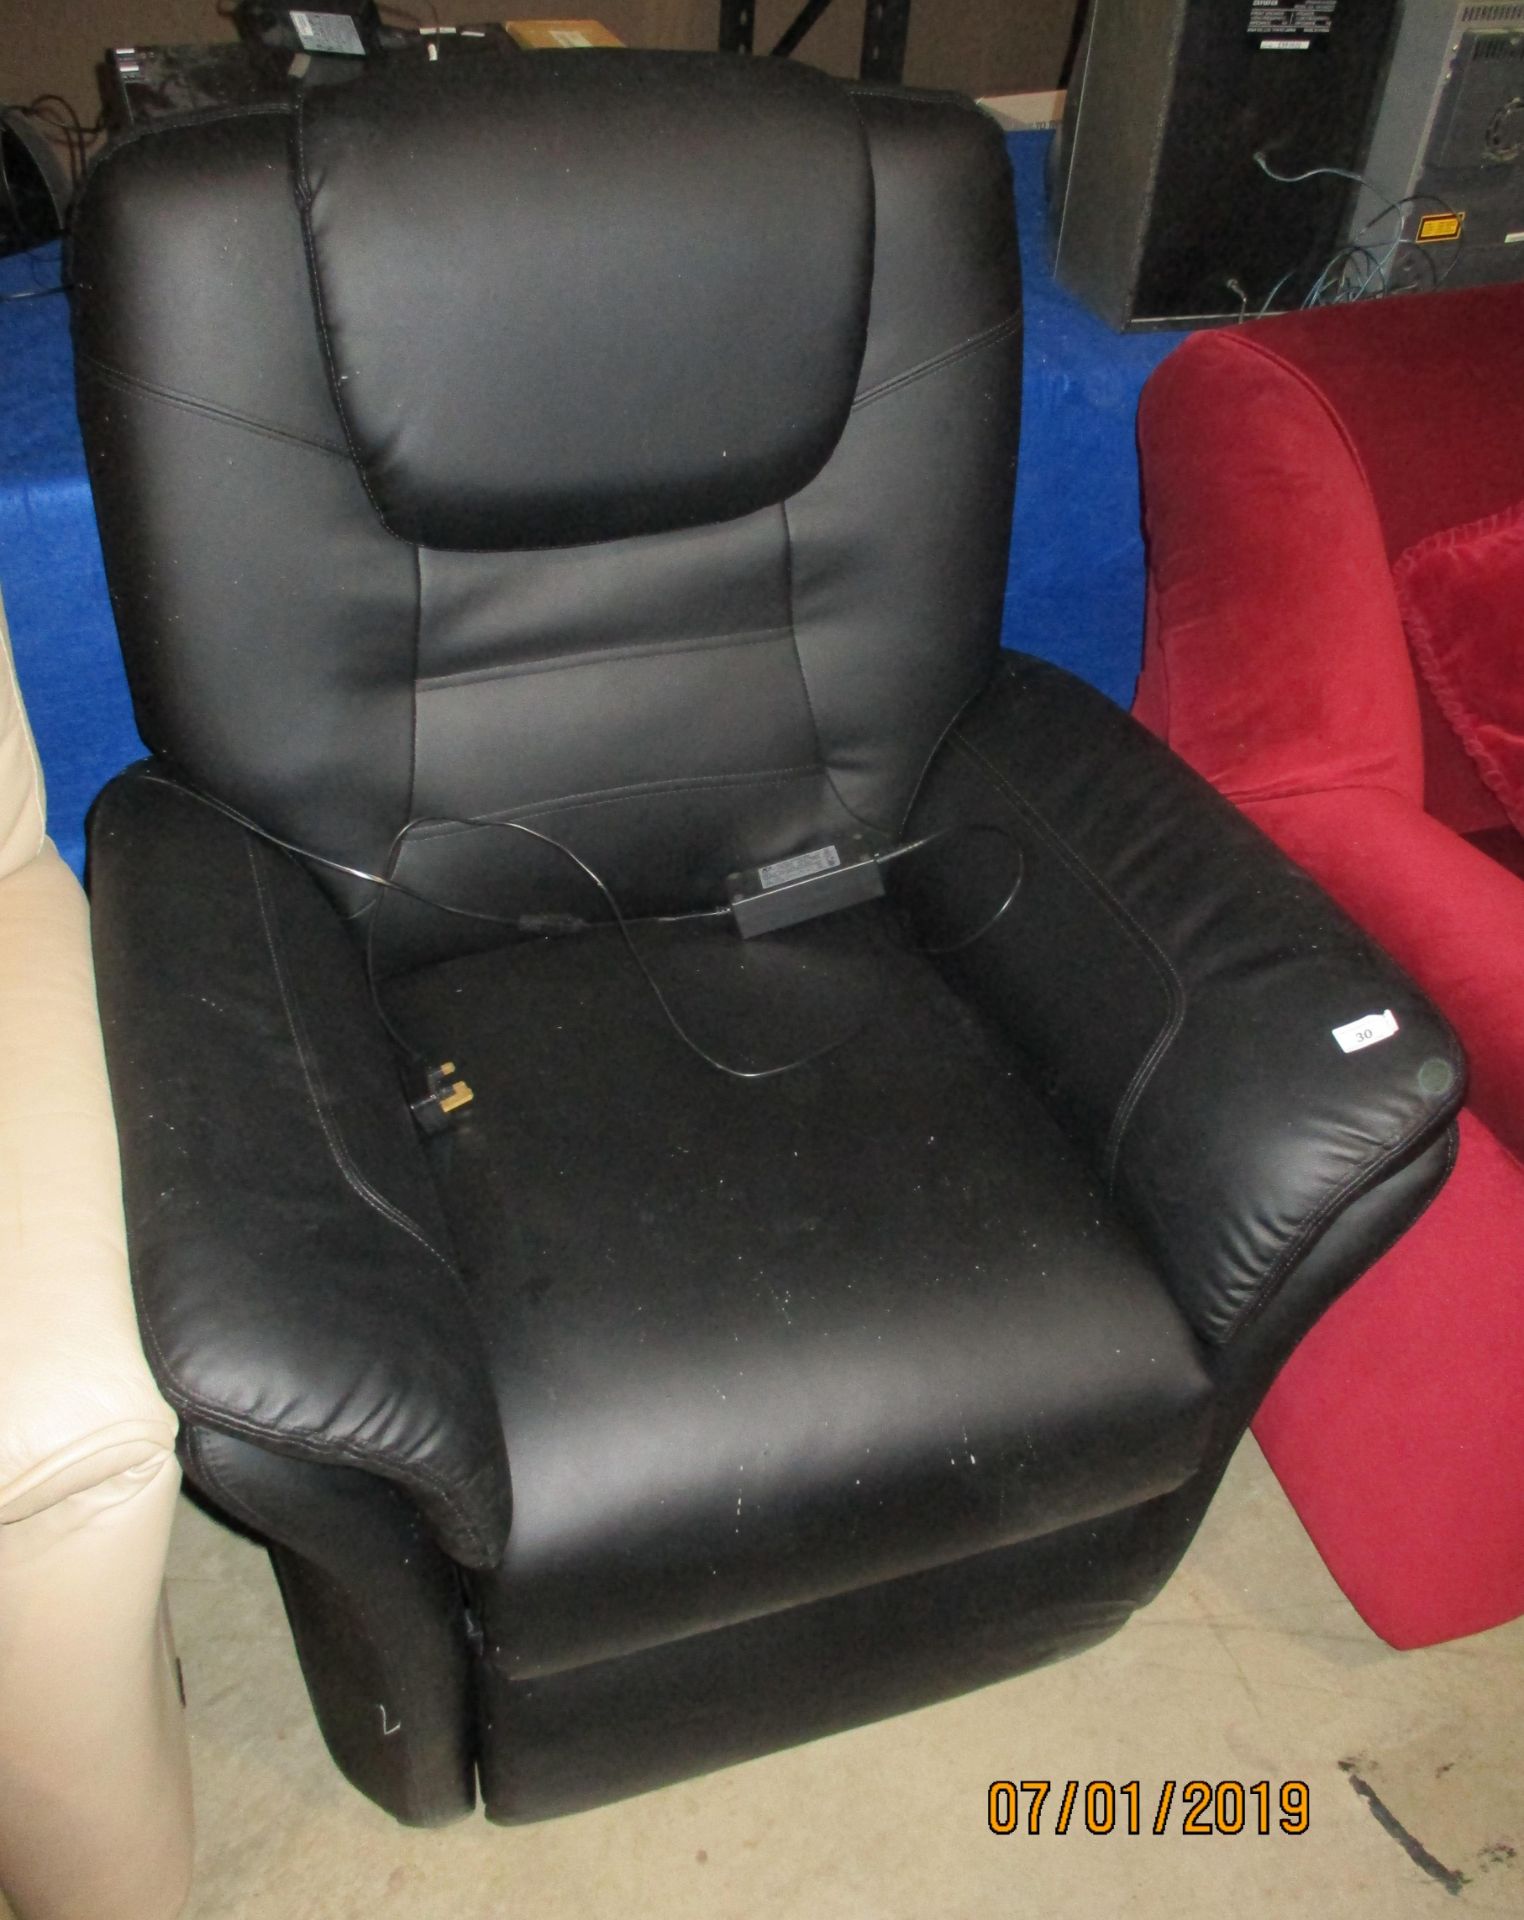 A black leather electric recliner armchair complete with power adaptor